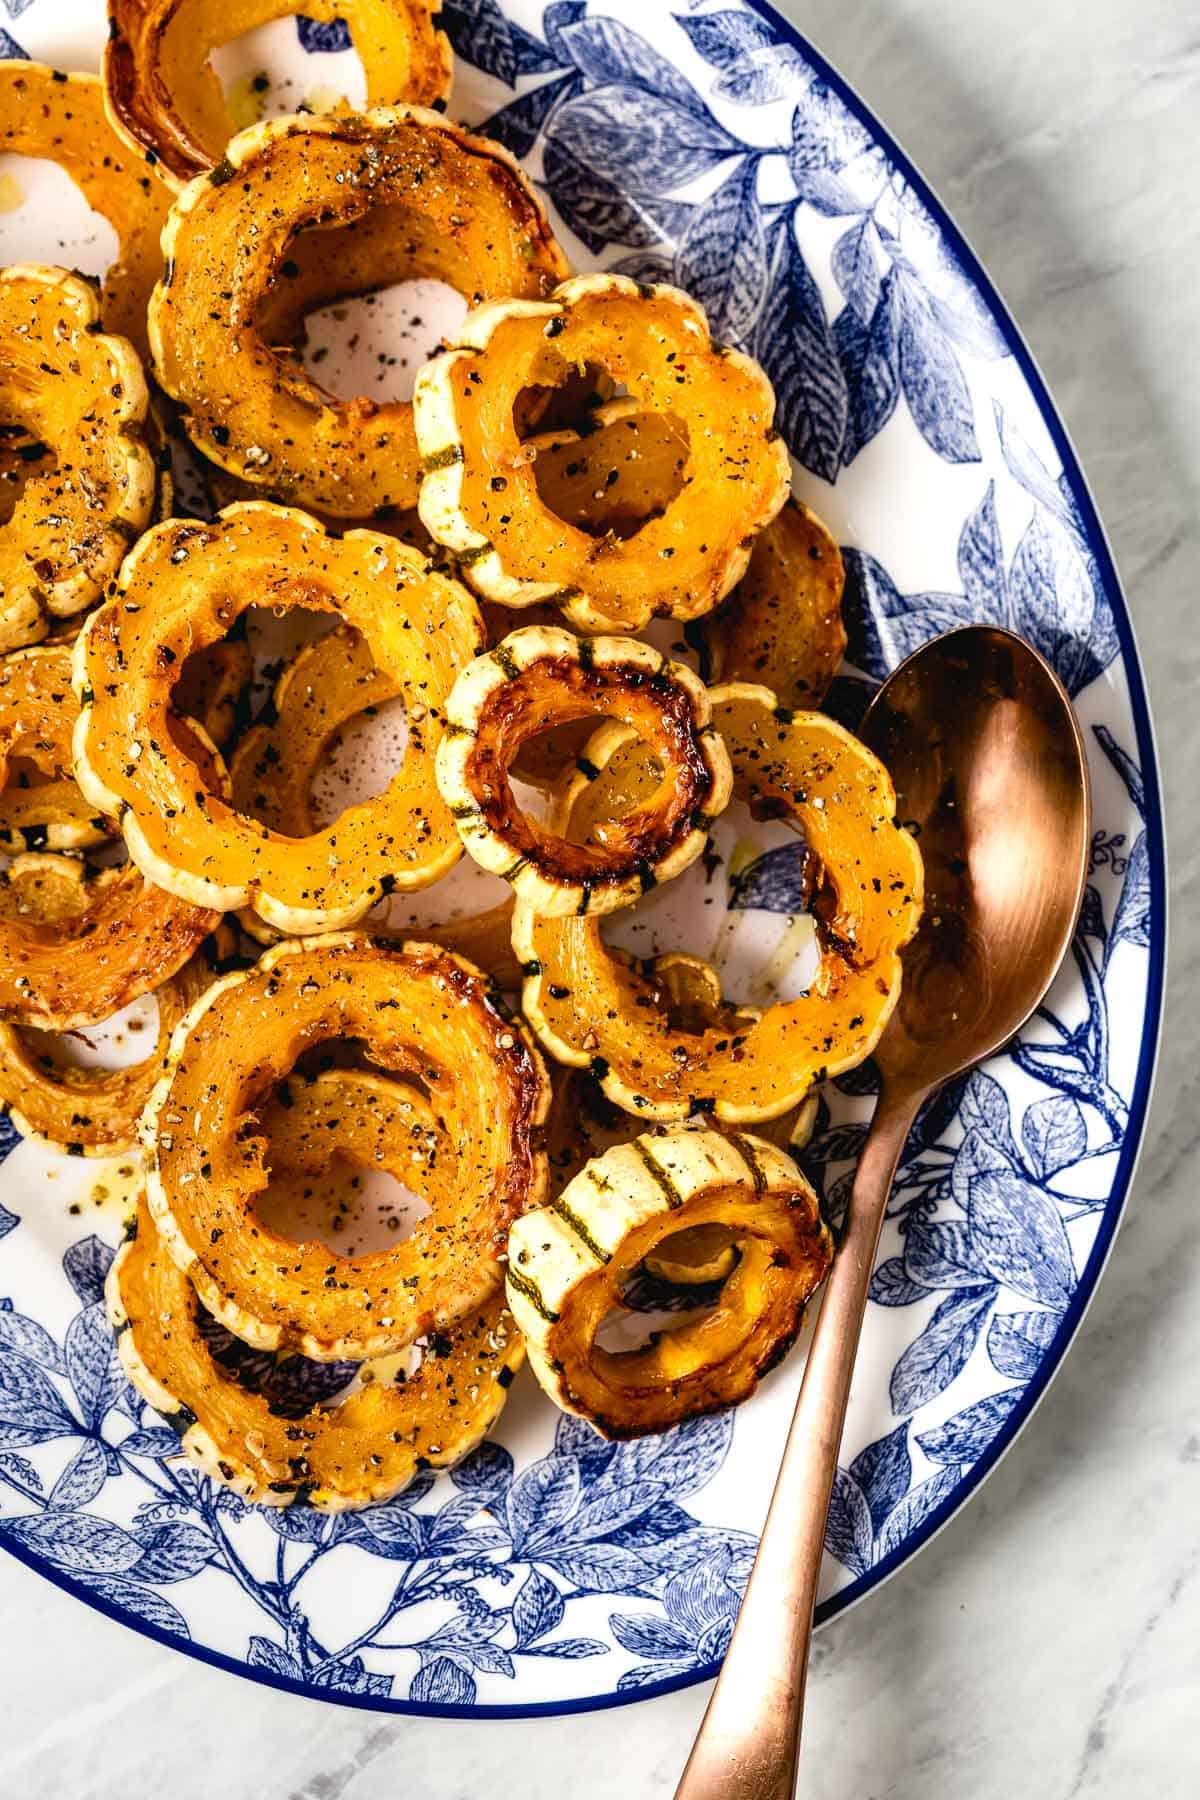 delicata squash to serve as an appetizer with chicken parm.